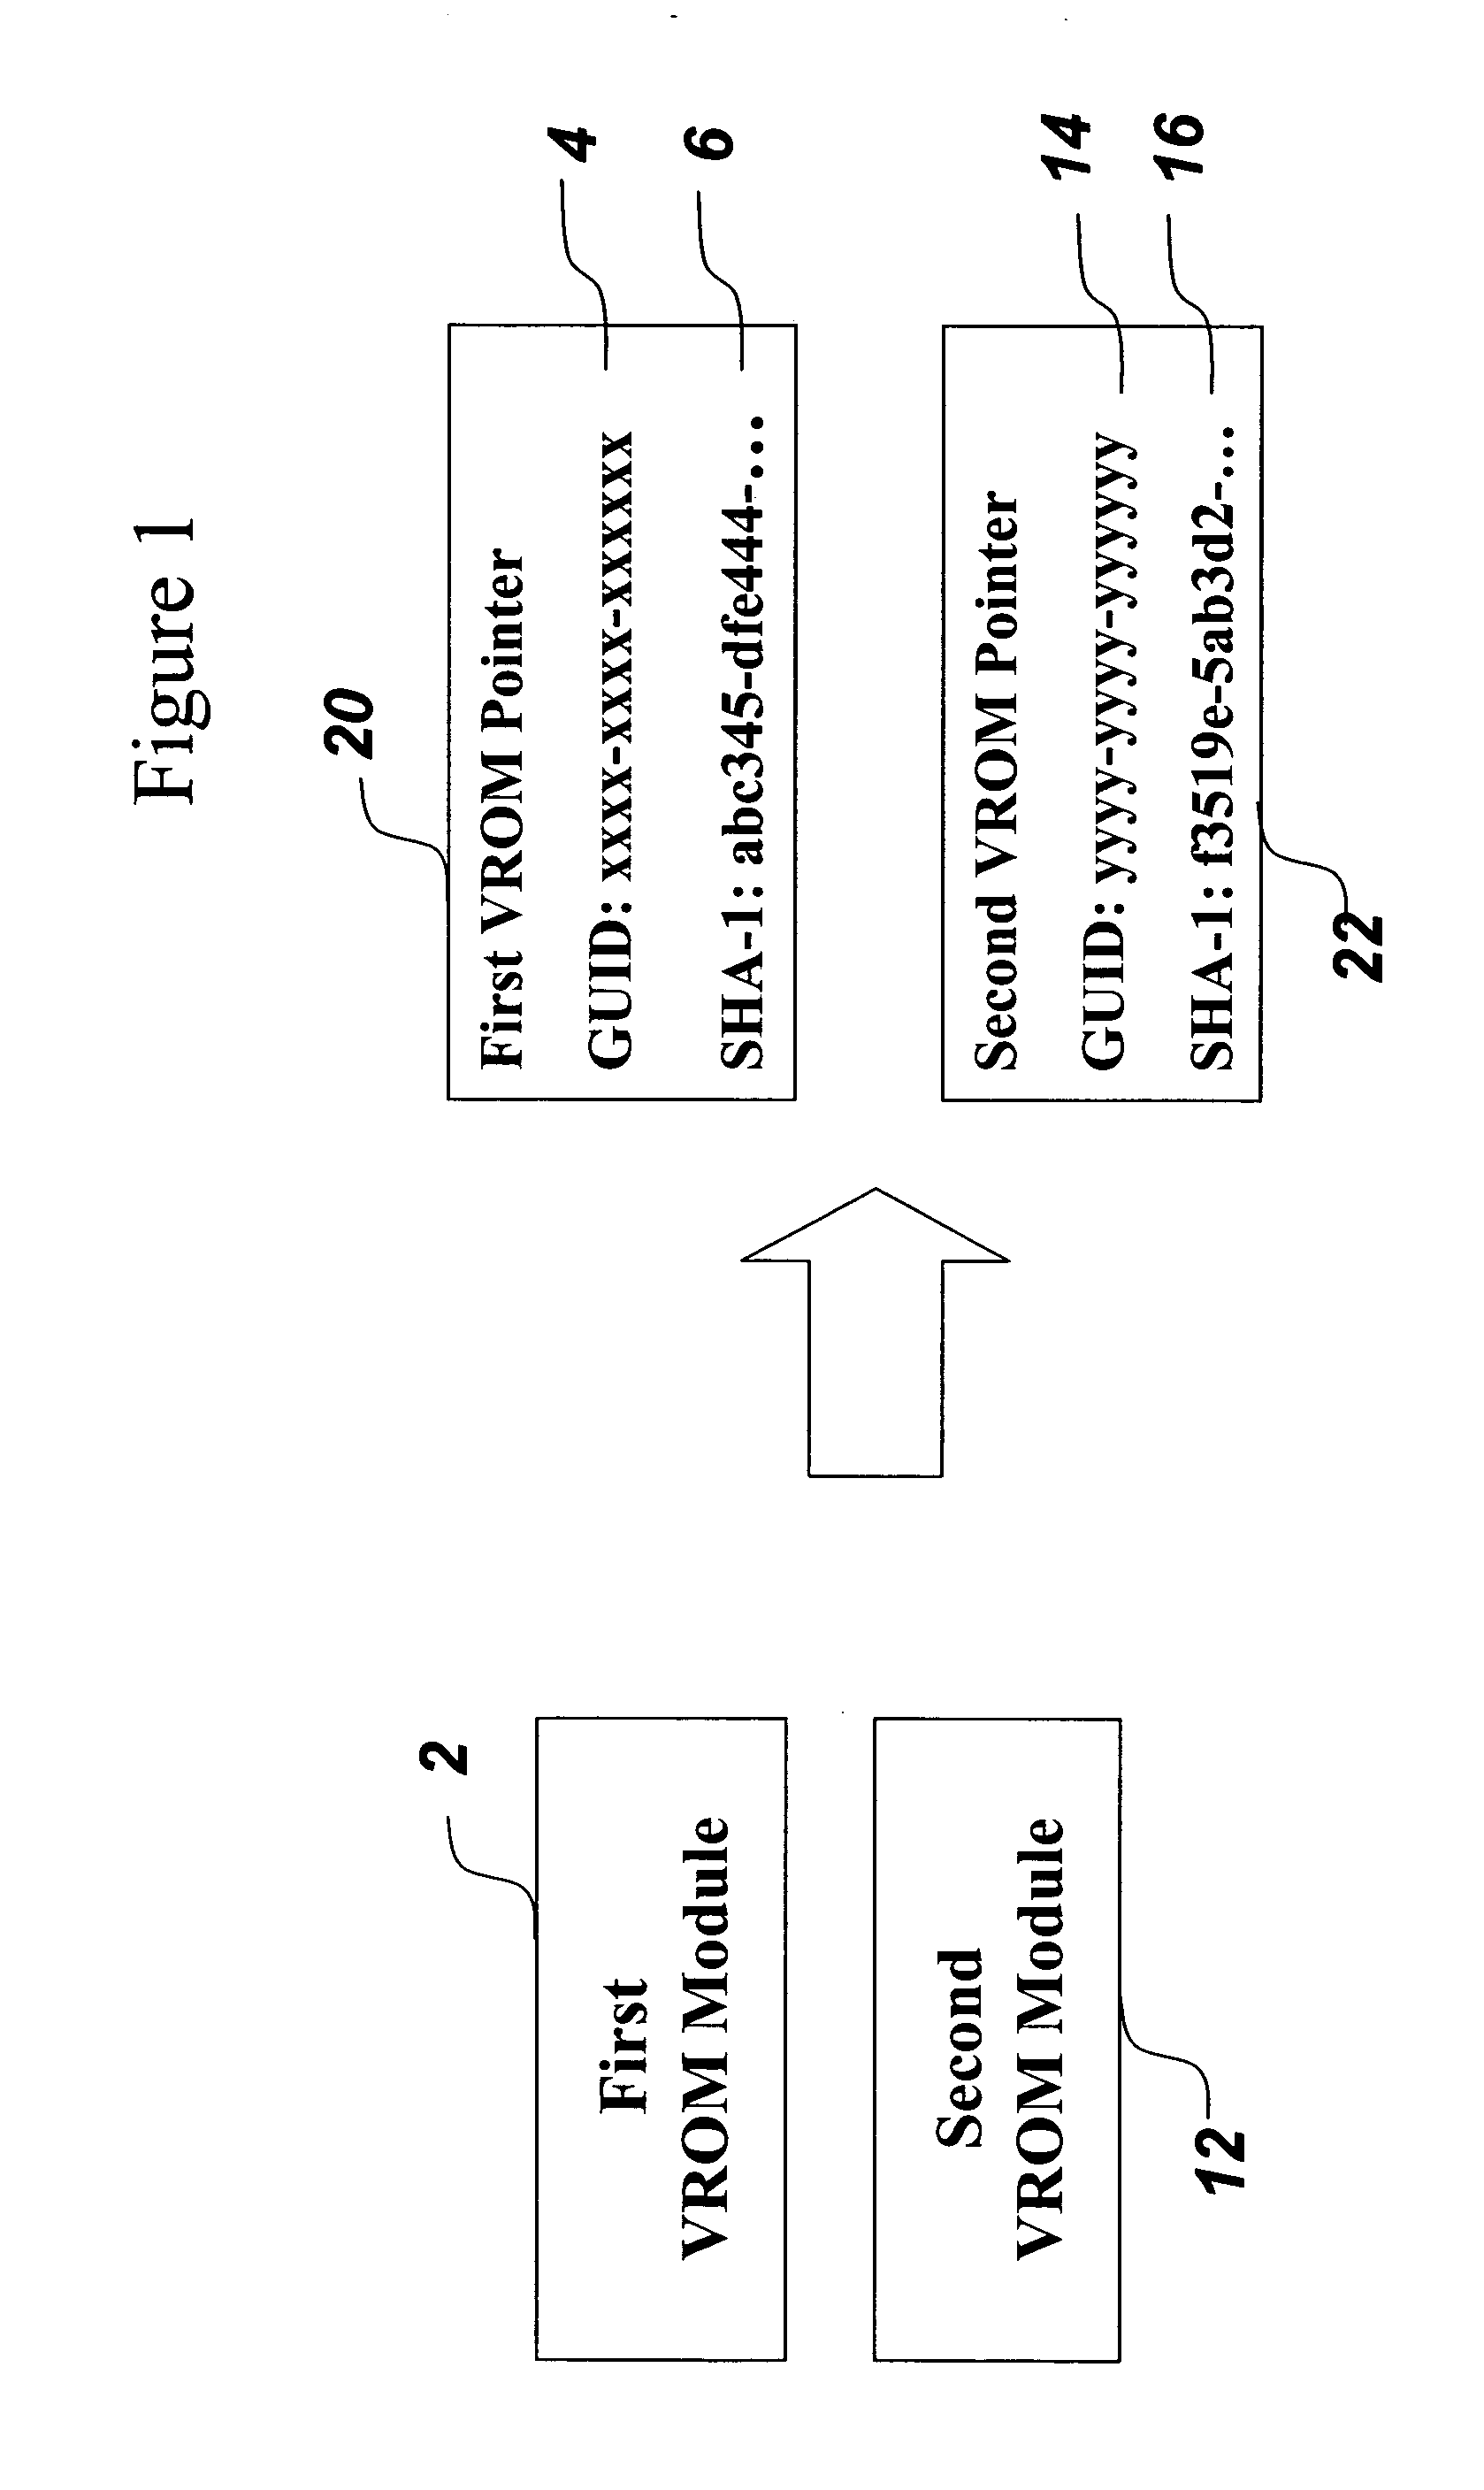 System and method for reducing memory requirements of firmware